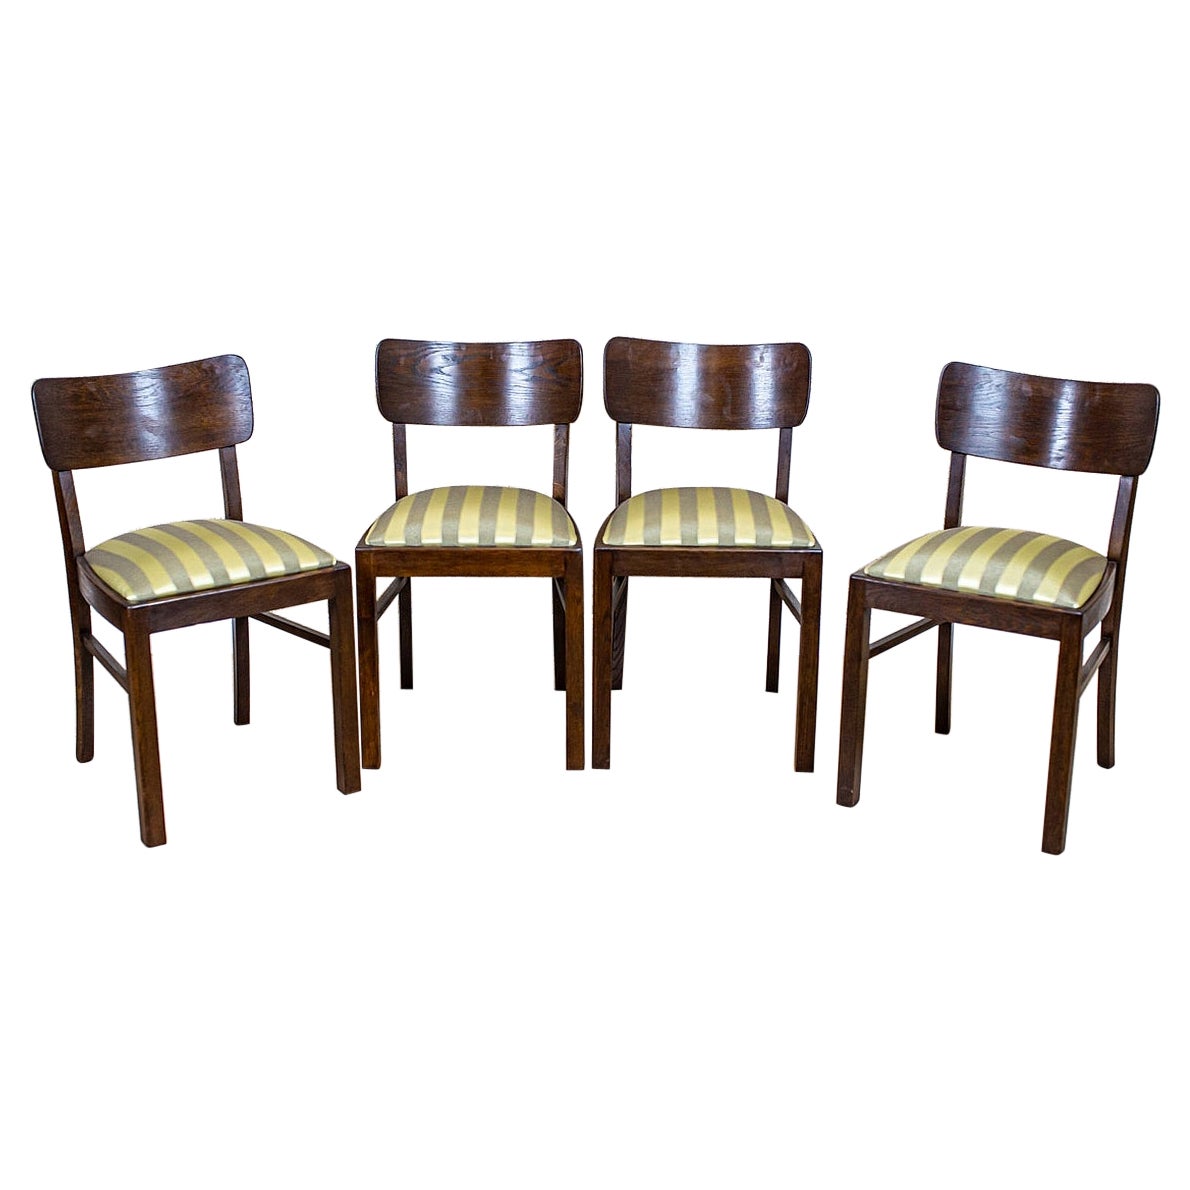 Four Art Deco Thonet Oak Chairs in Striped Upholstery